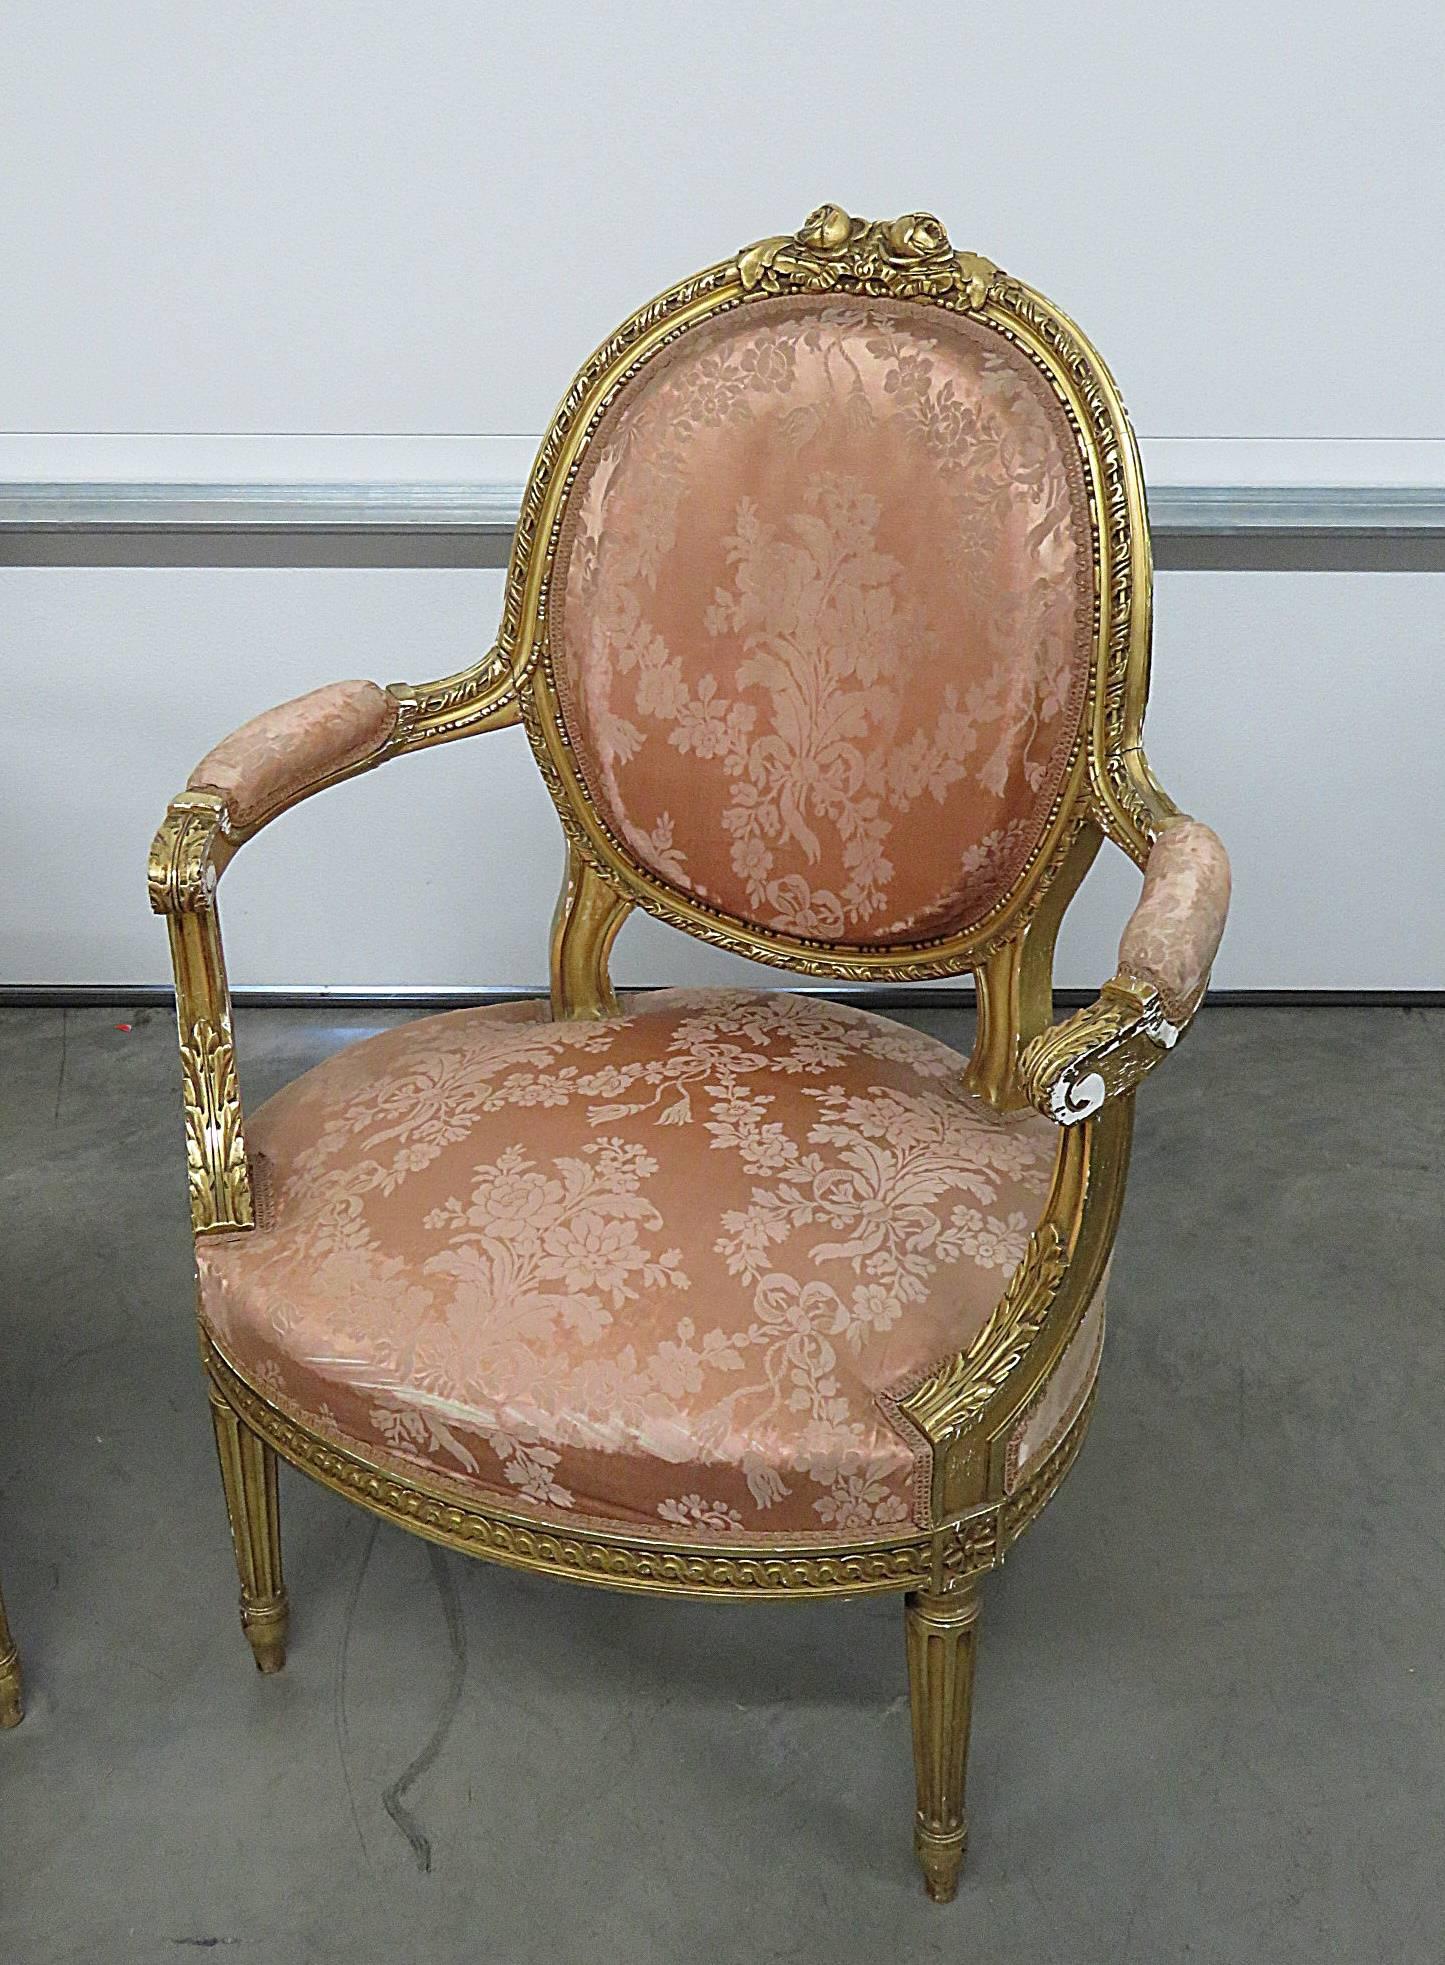 Pair of French Regency style armchairs with an 18